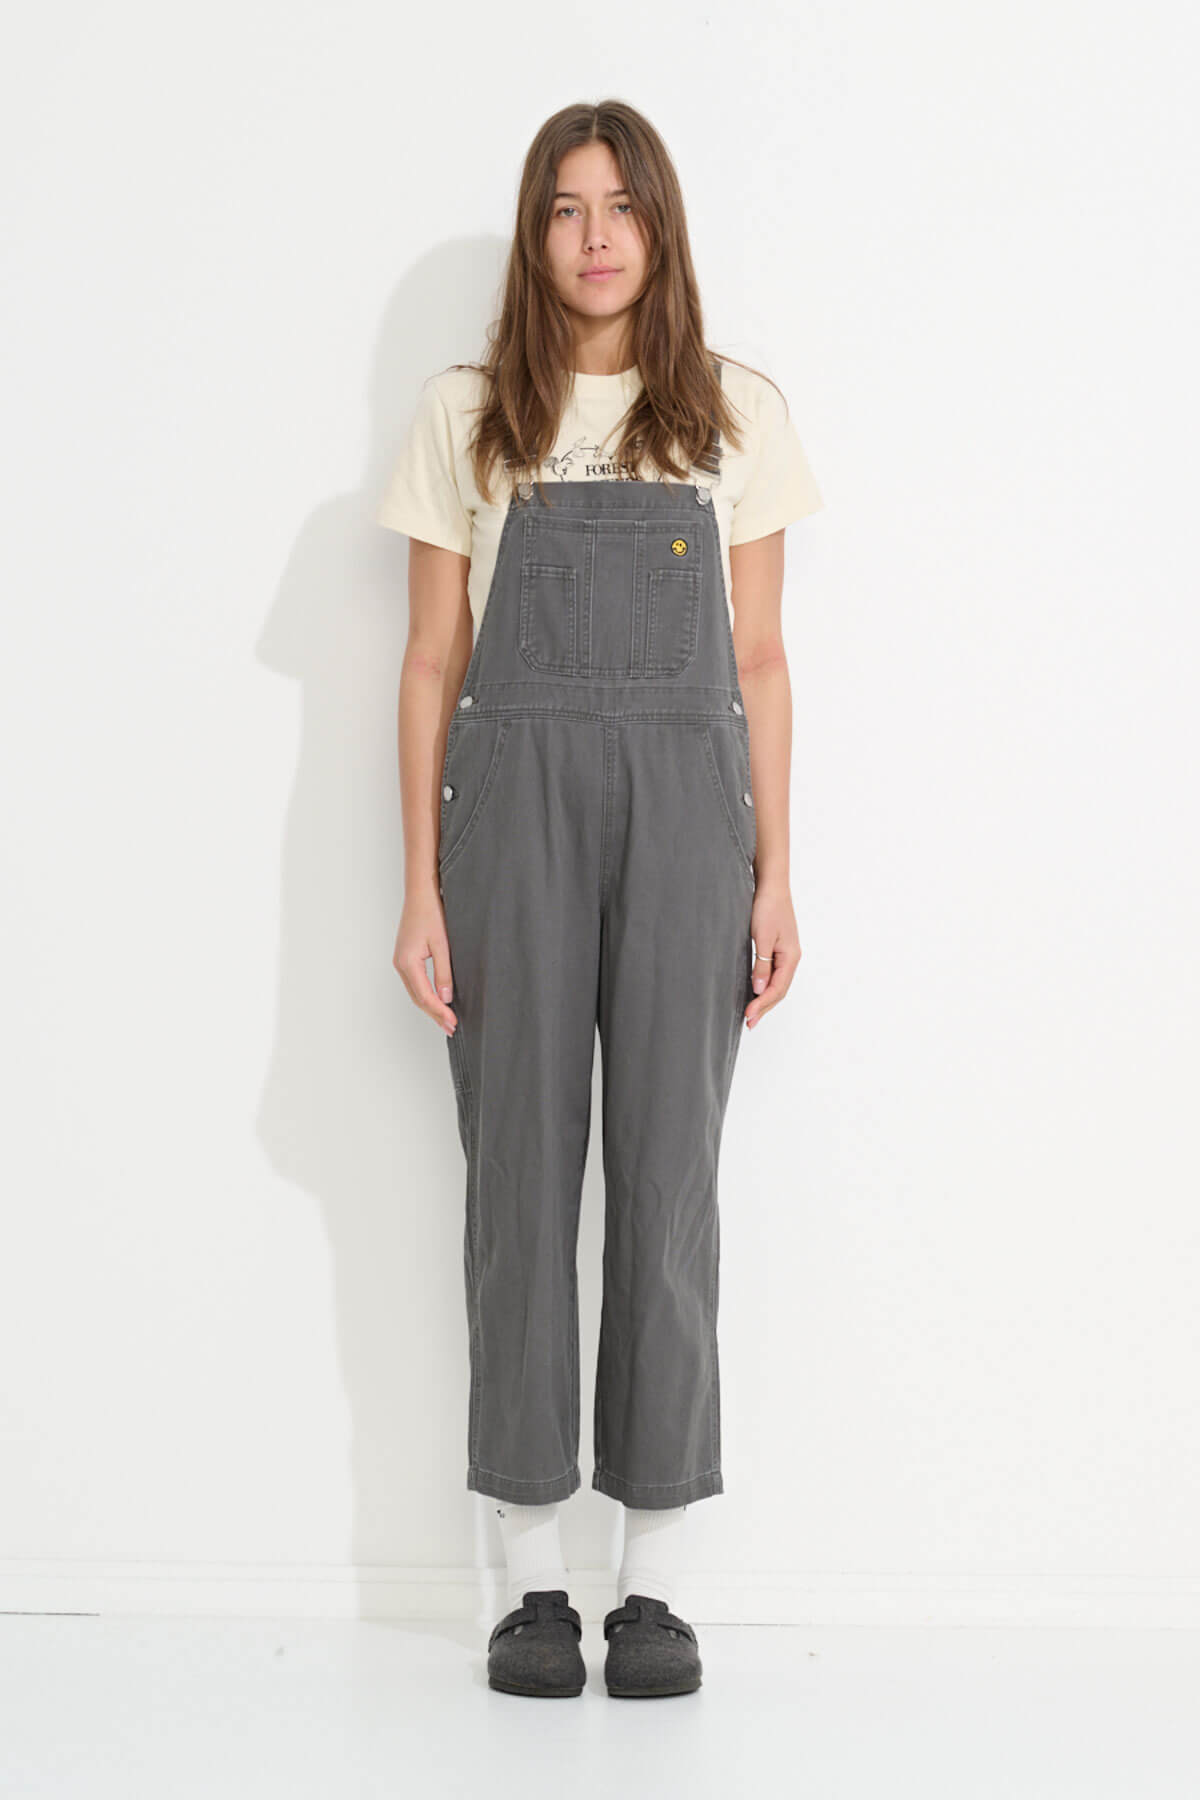 Misfit Shapes - Heavenly People Overalls - Charcoal